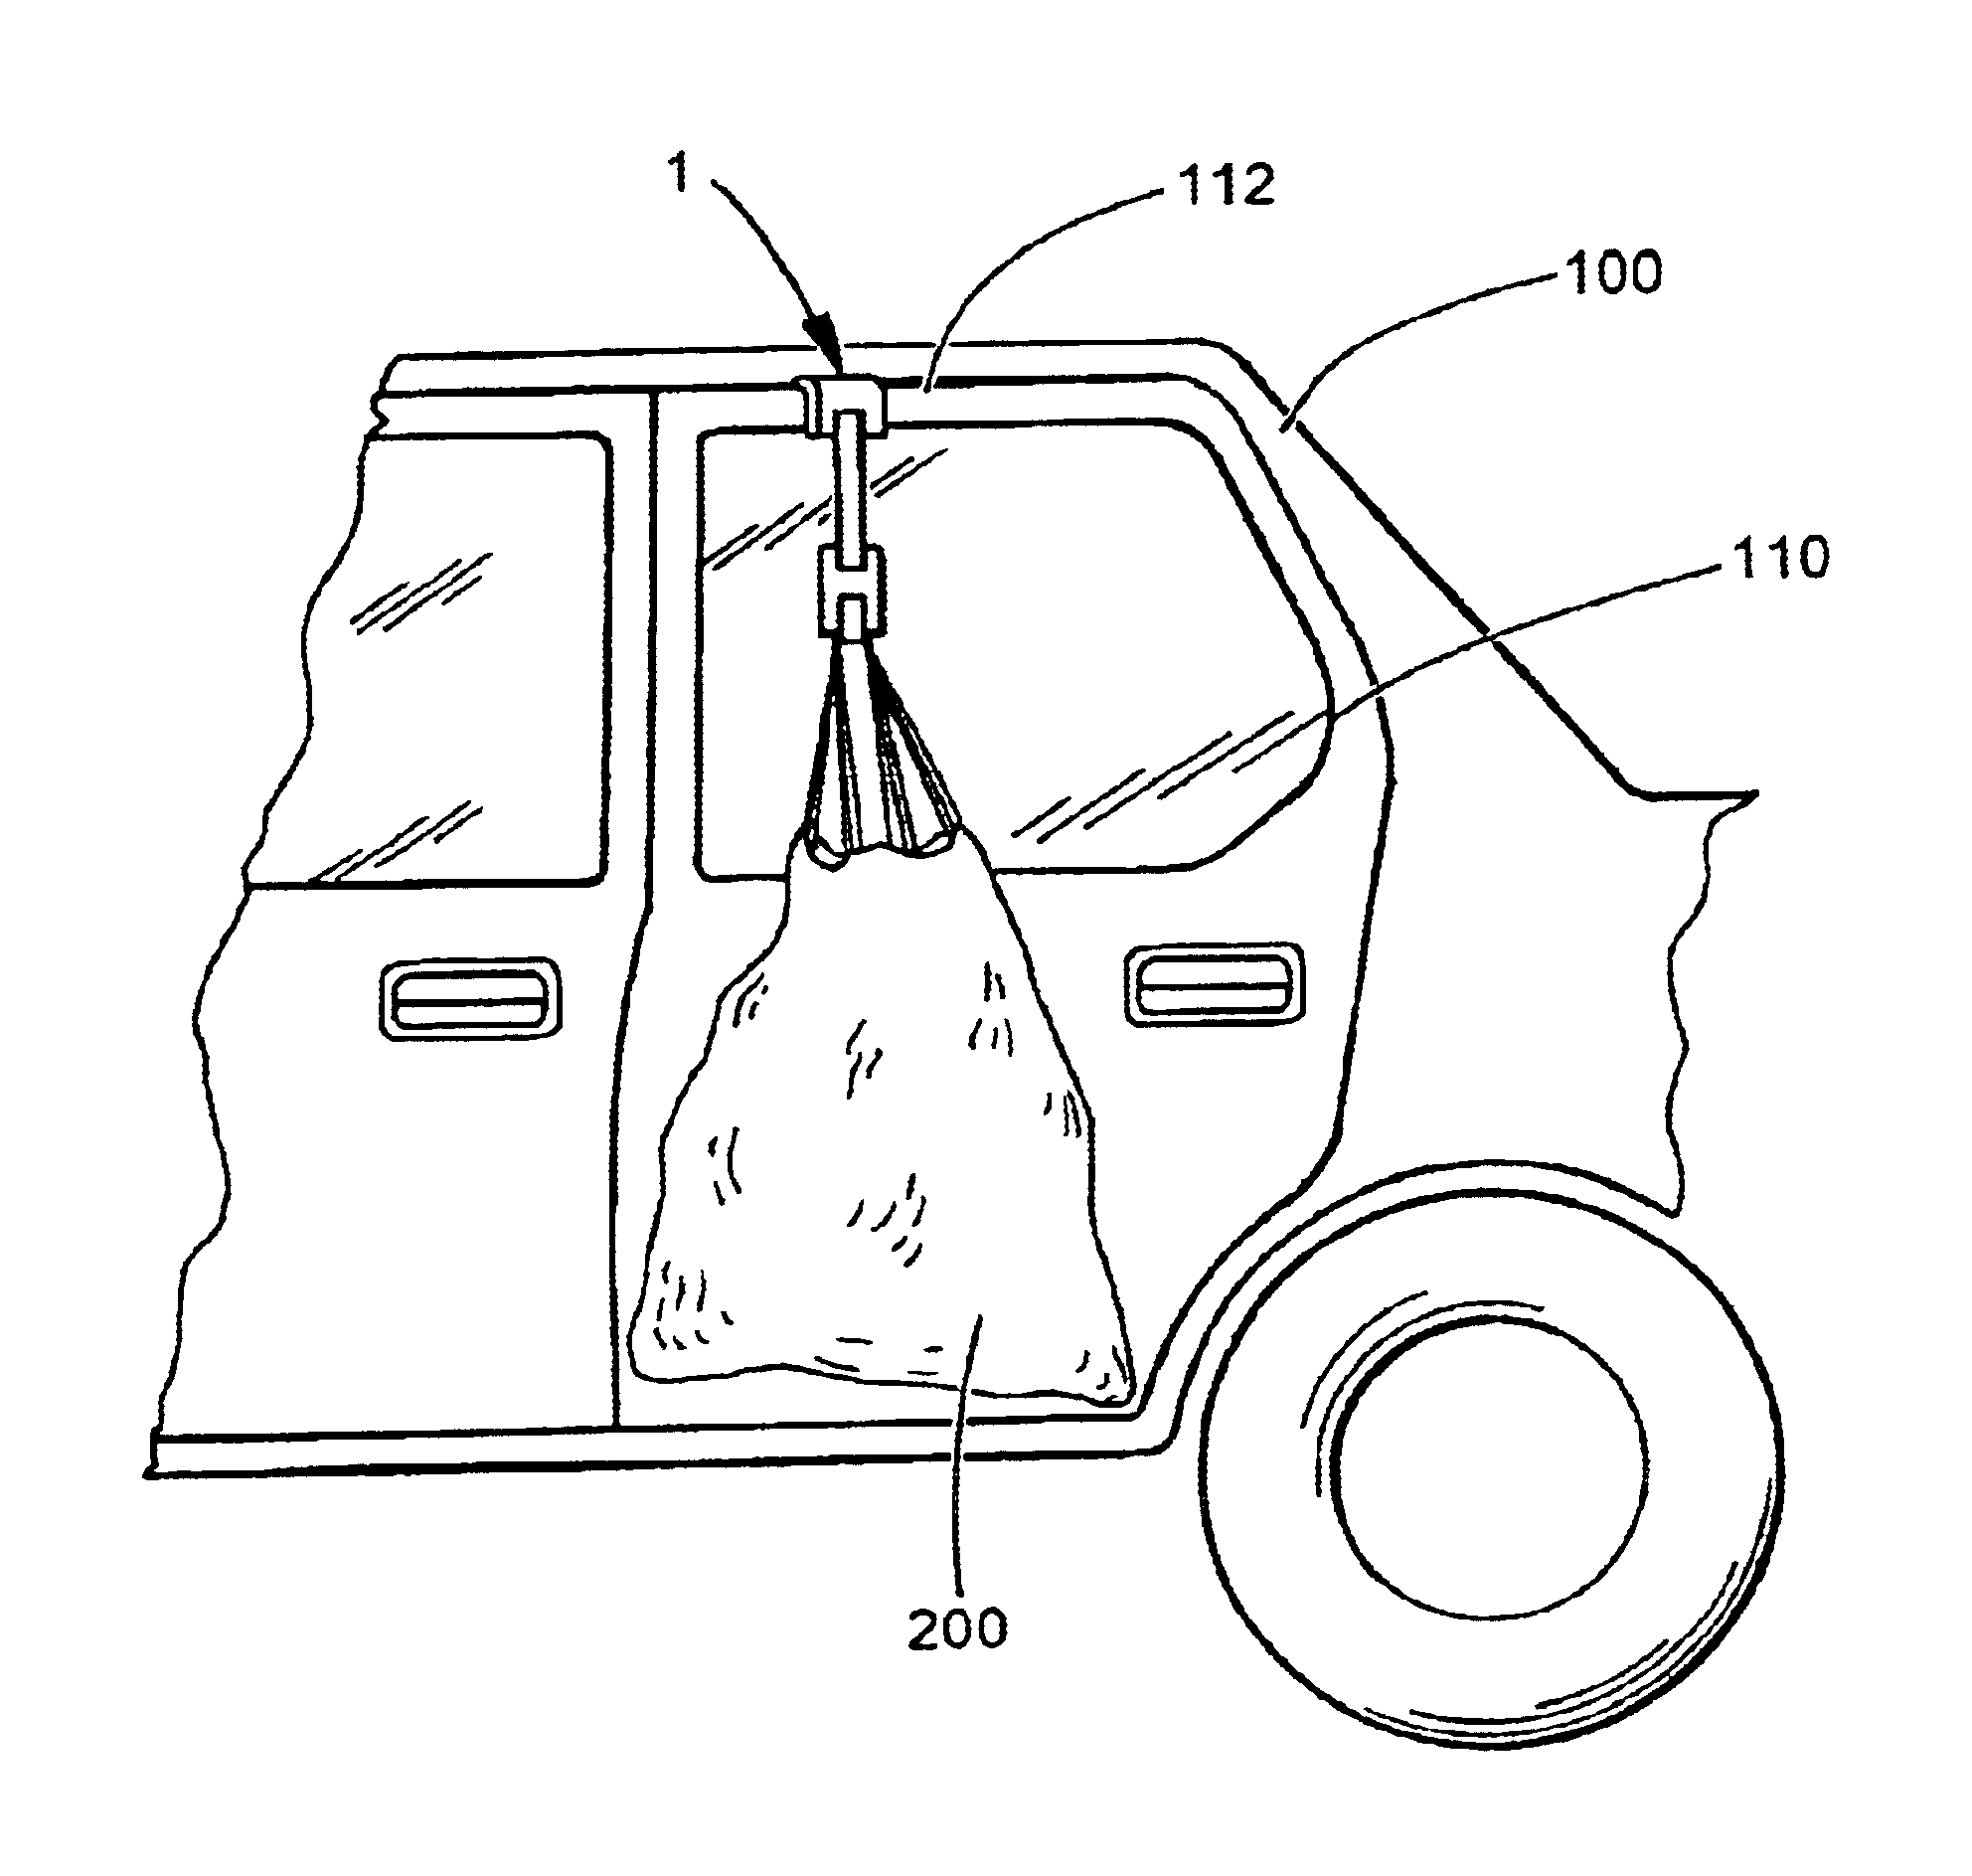 Device for hauling garbage bags